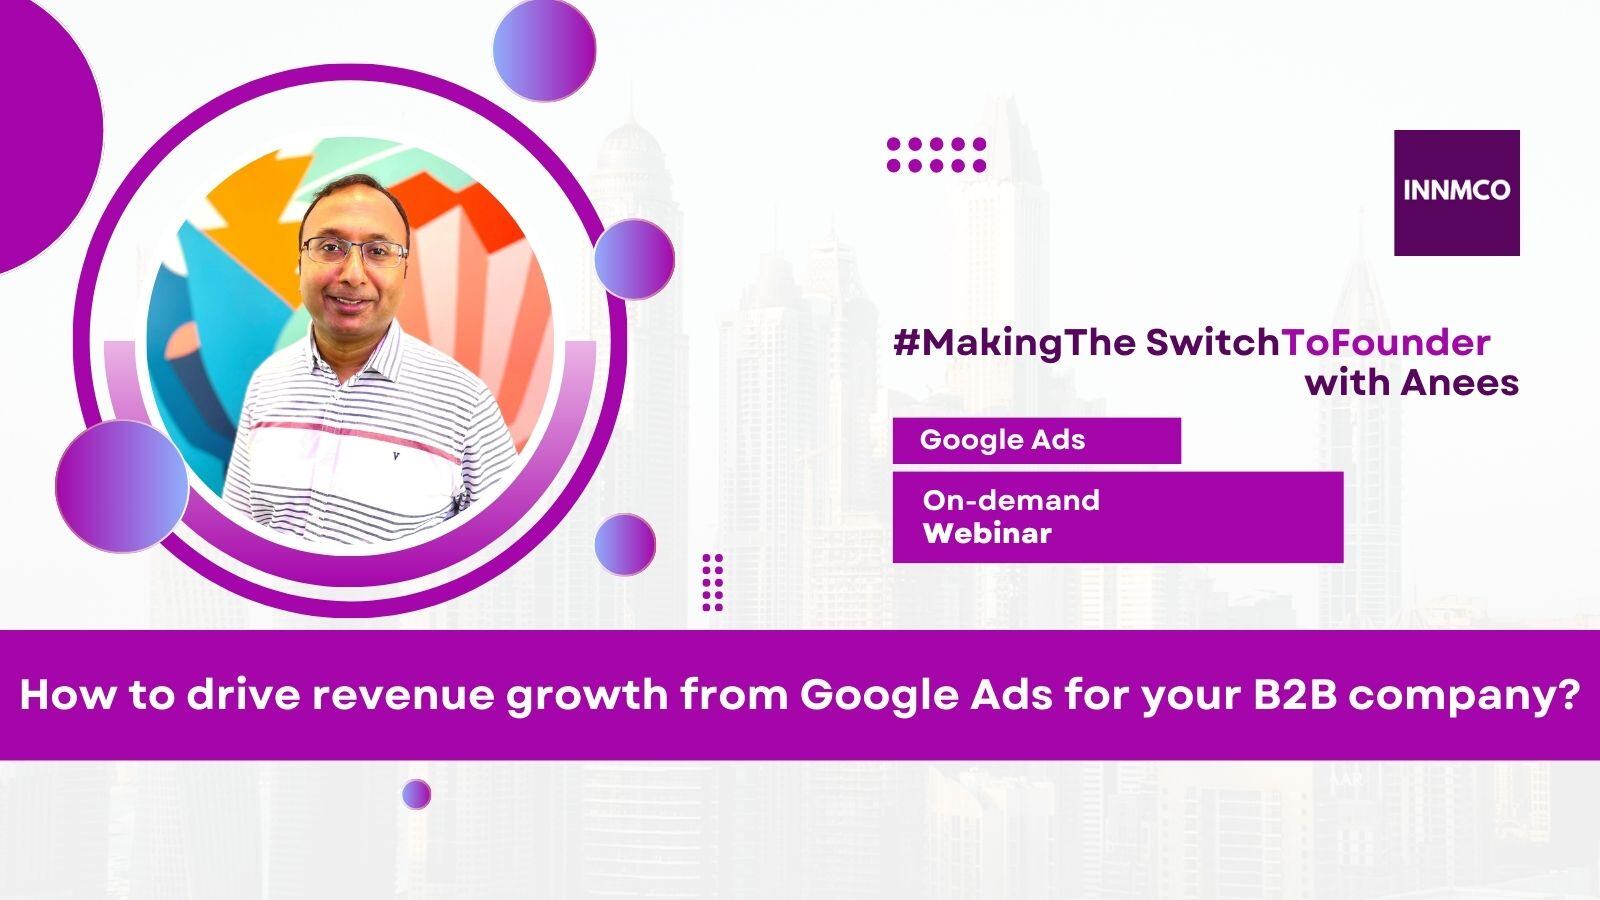 INNMCO On-demand Webinar - How to drive revenue growth from Google Ads for your B2B company